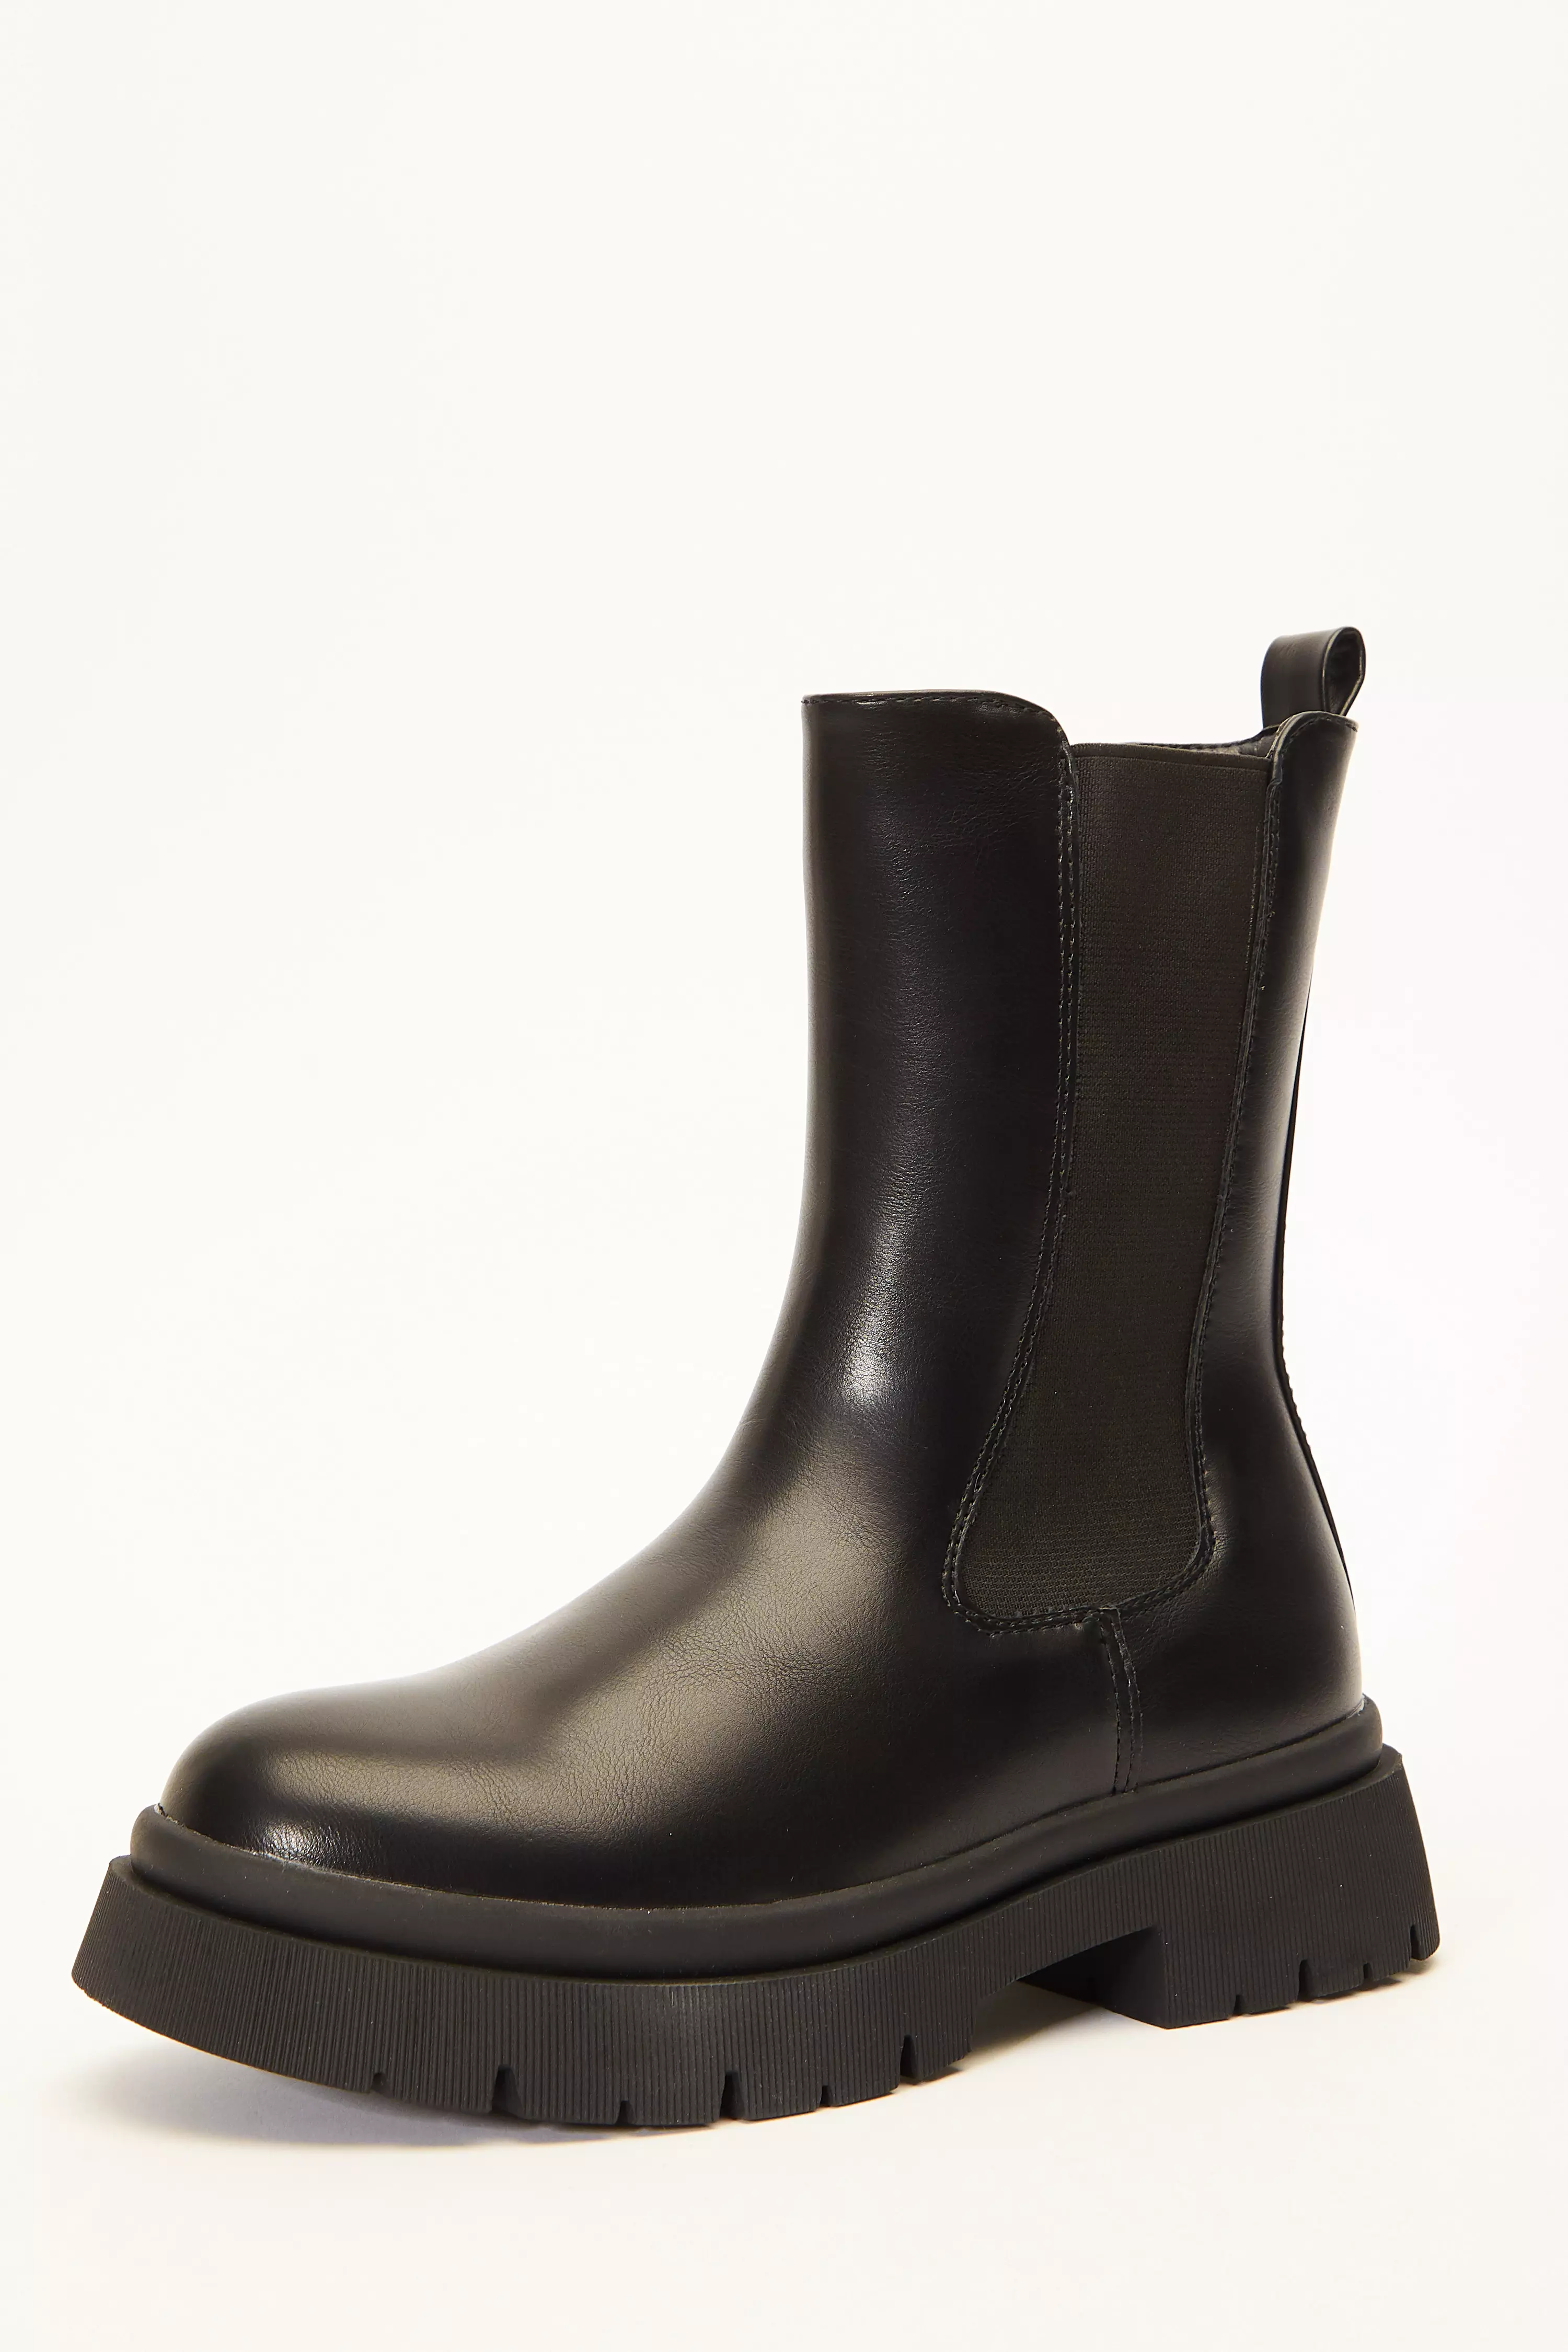 Women's Chunky Boots | Black & Chelsea Chunky Boots | QUIZ